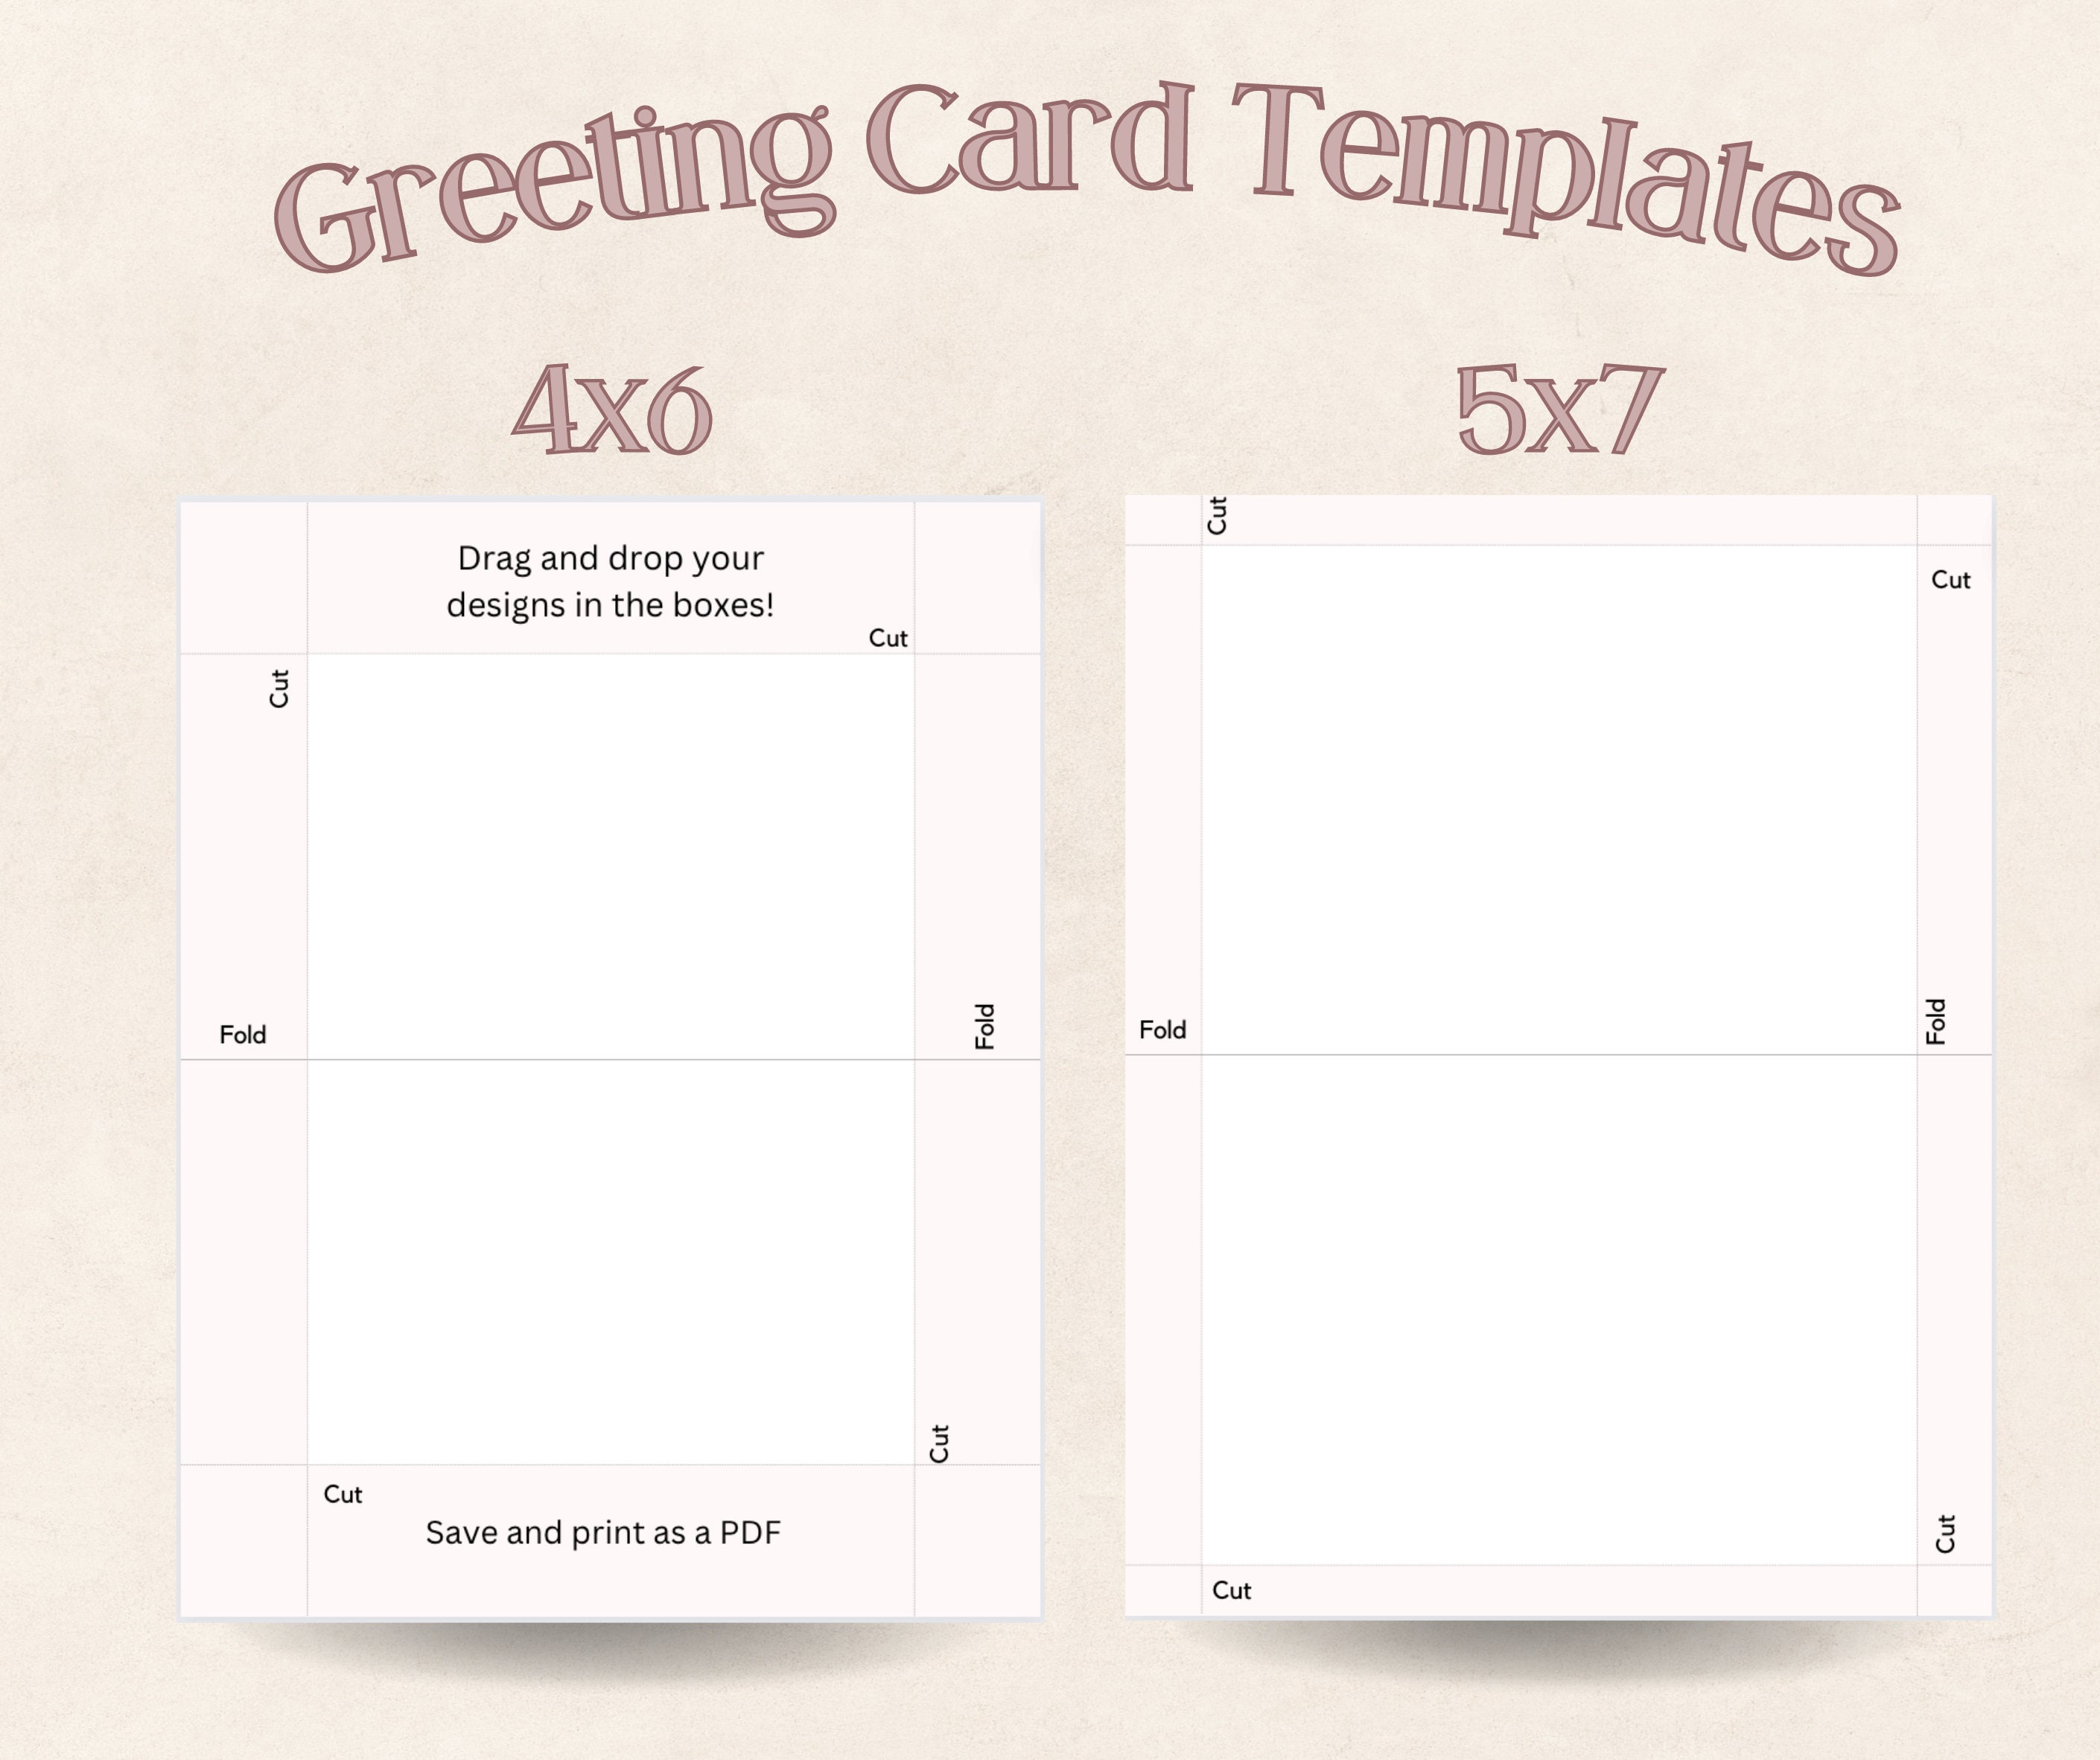 drag-and-drop-greeting-card-templates-4x6-and-5x7-foldable-etsy-france